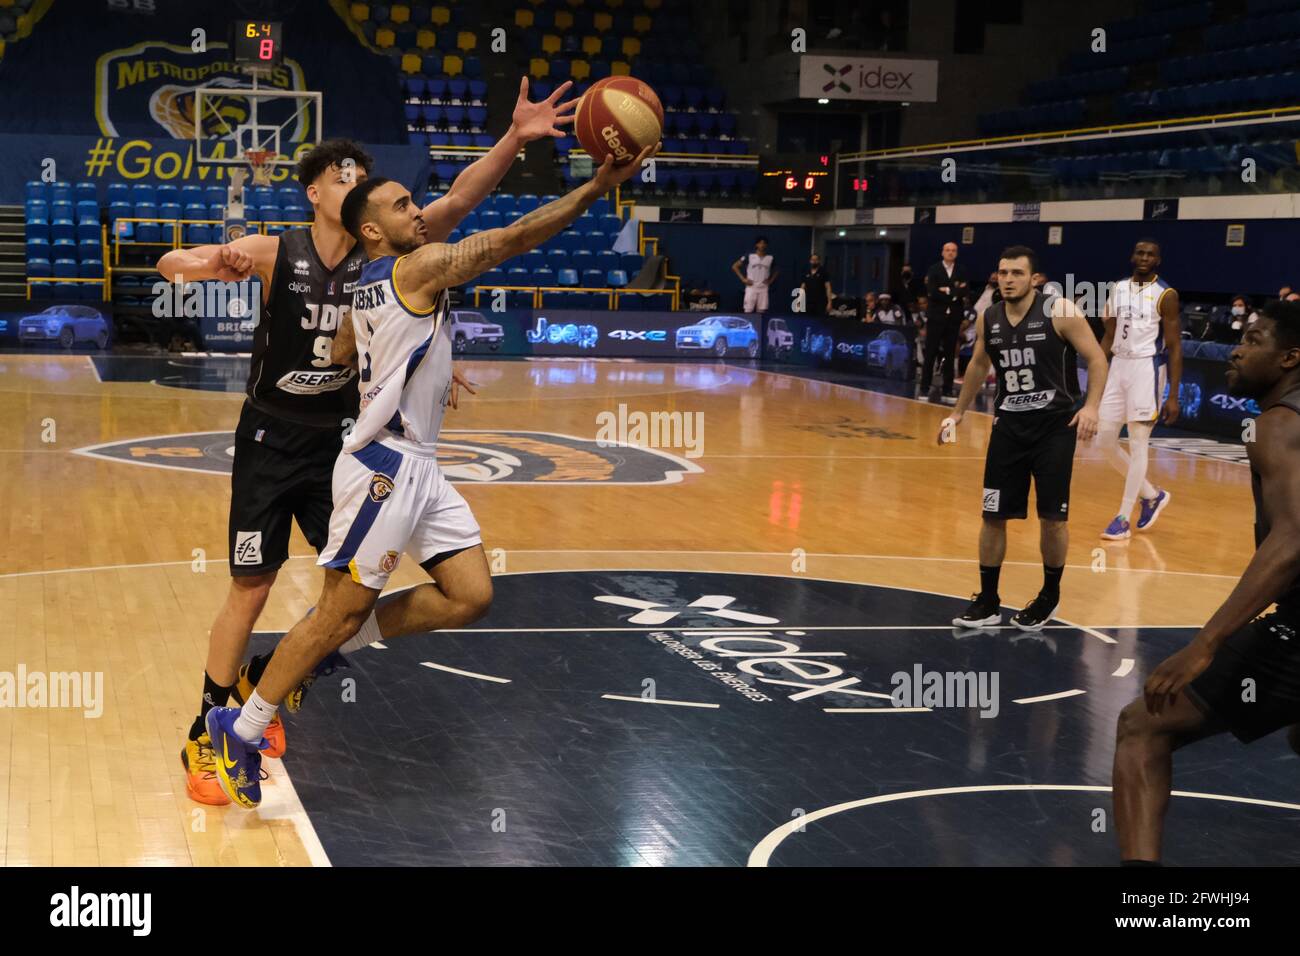 Levallois, Hauts de Seine, France. 22nd May, 2021. BRANDON BROWN point  guard of Boulogne-Levallois in action during the French Basketball  championship Jeep Elite between Boulogne-Levallois and Dijon at Marcel  Cerdan stadium -